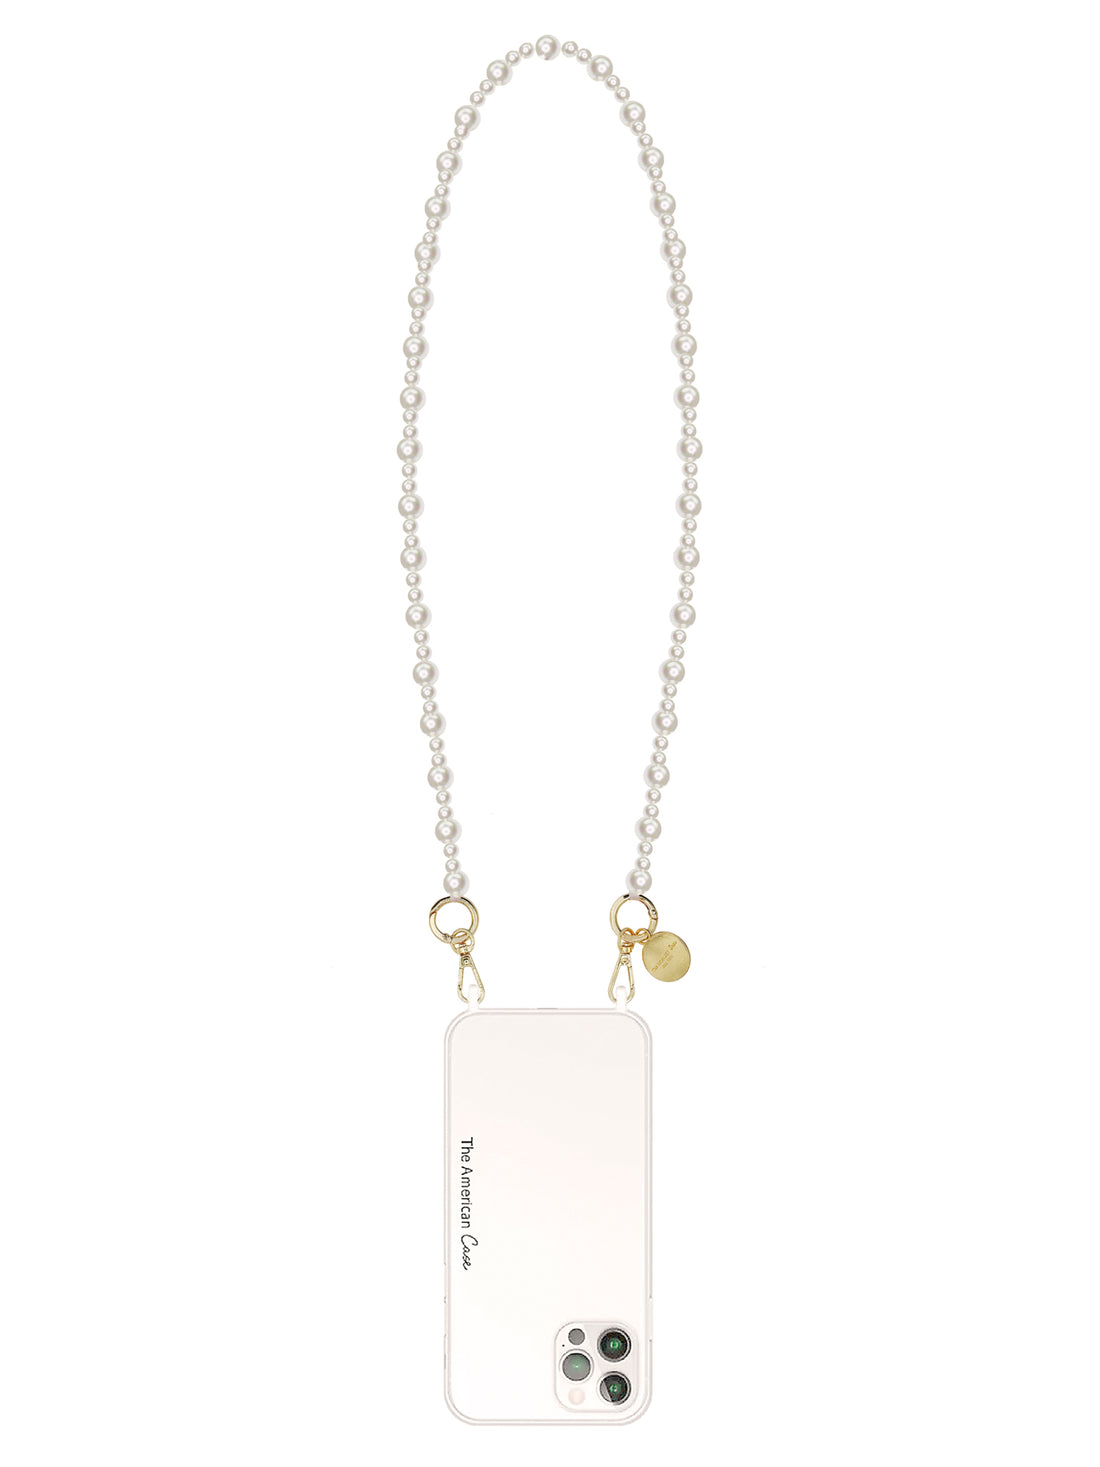 Aiko - Crossbody Long Pearl Chain with Gold Carabiners